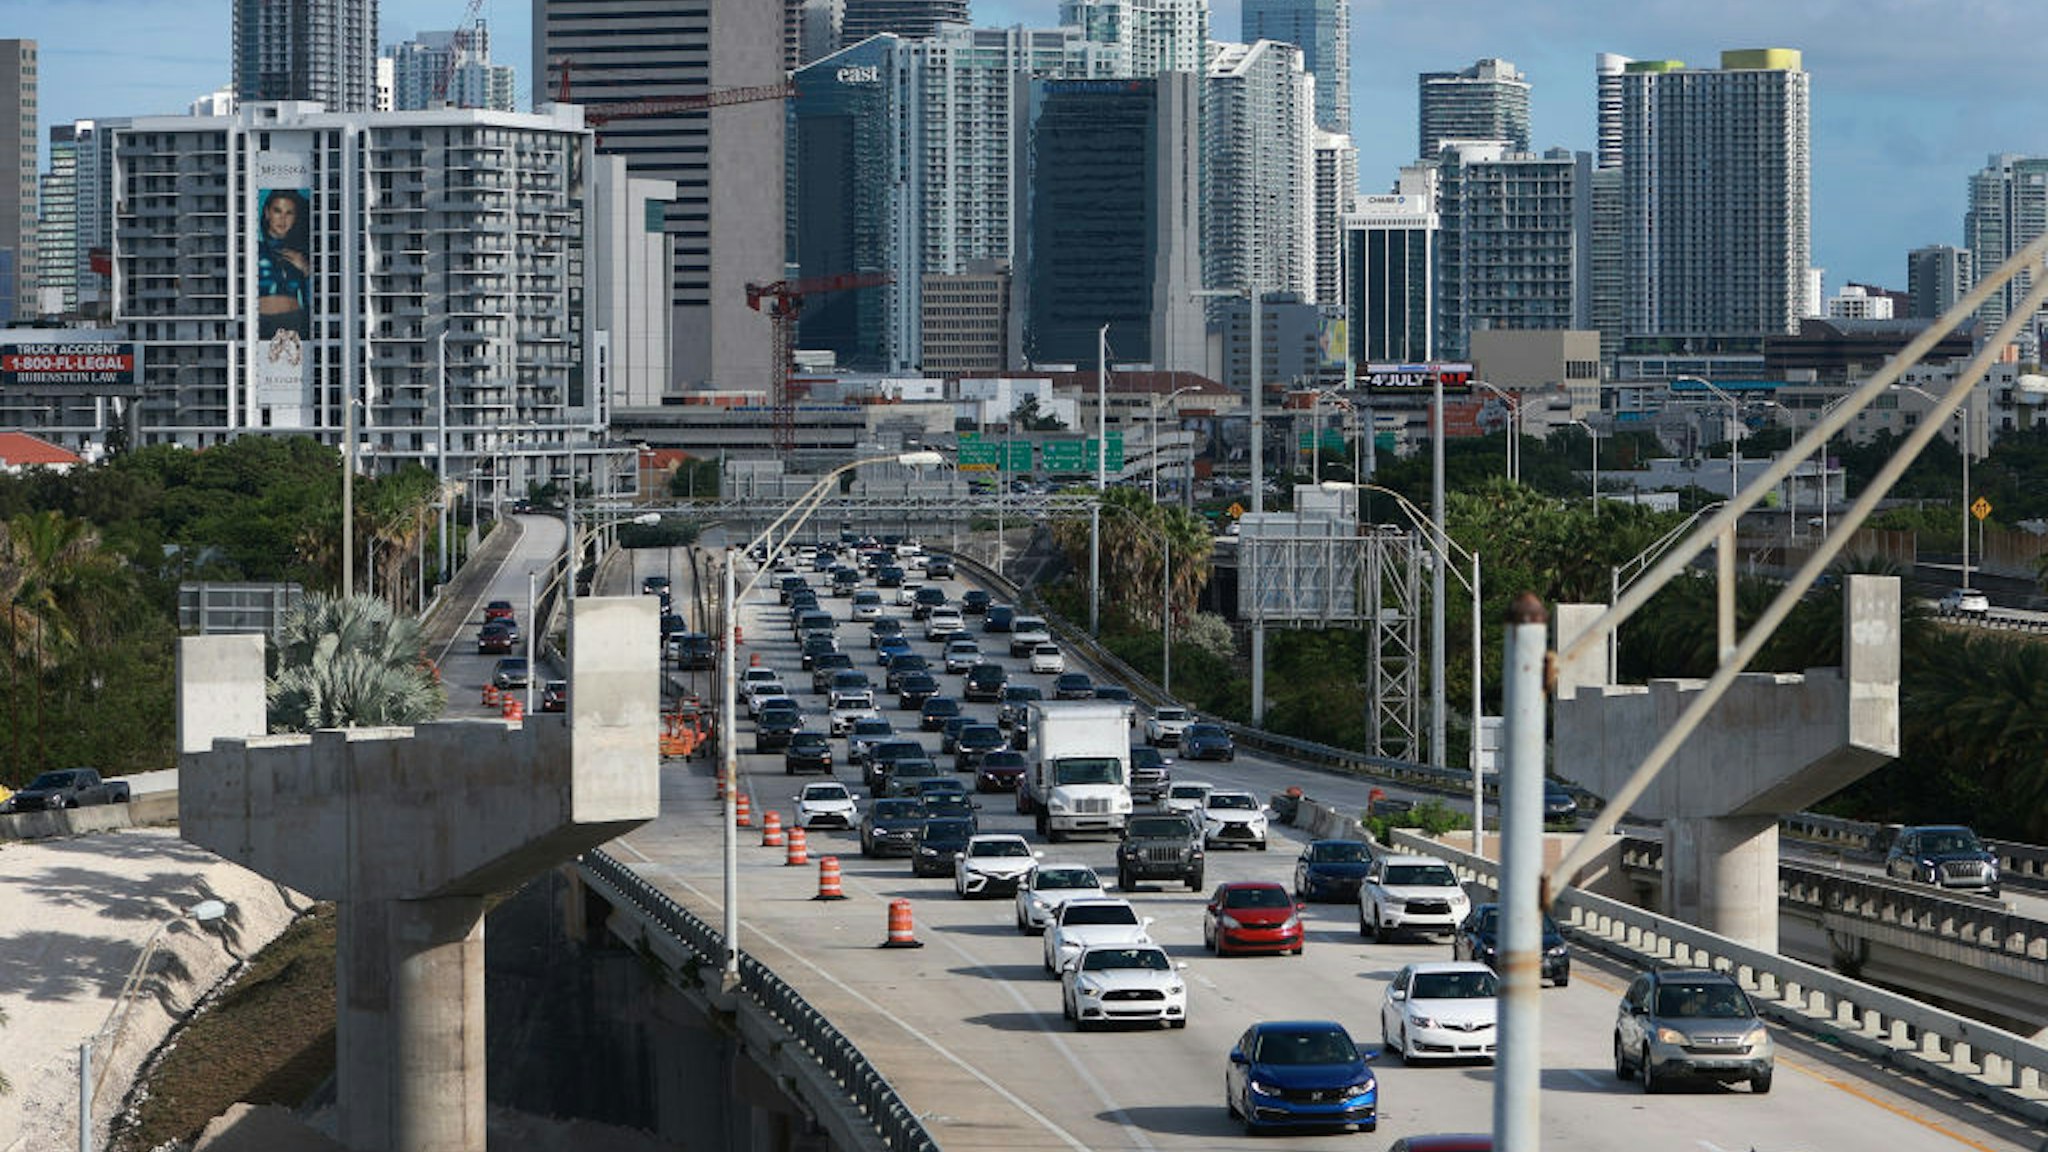 MIAMI, FLORIDA - JUNE 30: Vehicles drive along I-95 as they leave the downtown area on June 30, 2022 in Miami, Florida. According to a report from AAA for the July 4 holiday weekend, they forecast that 42 million Americans, the most ever, will take a road trip of 50 miles or more. (Photo by Joe Raedle/Getty Images)